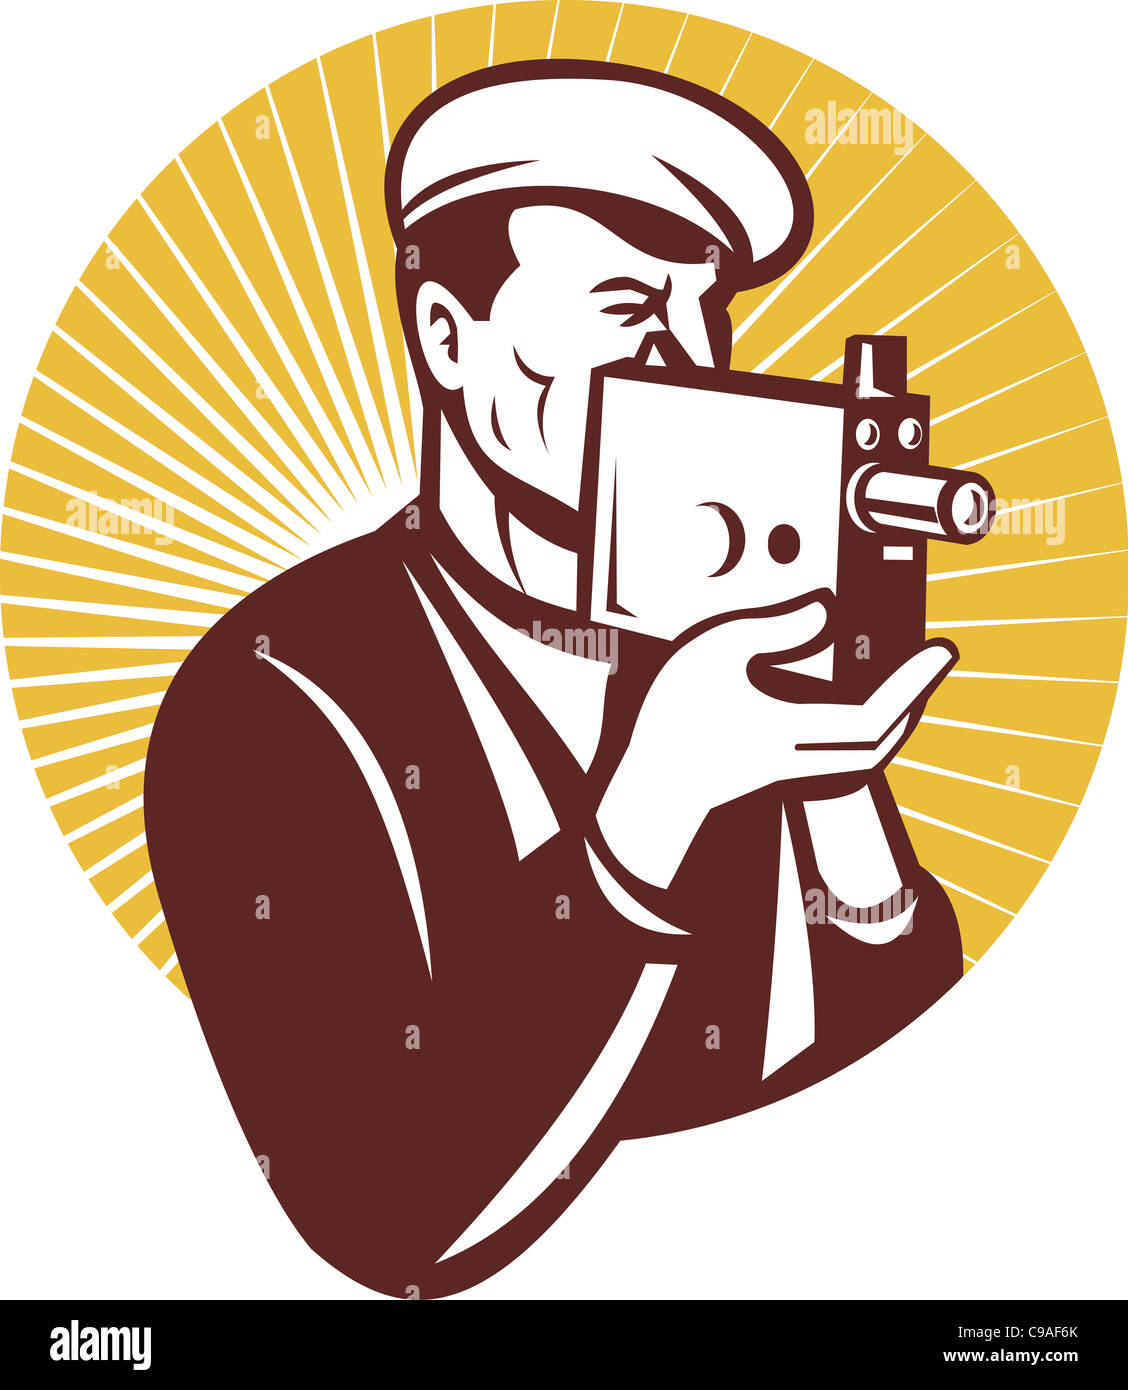 illustration of a Cameraman with vintage camera shooting side view done in the retro woodcut style set inside circle Stock Photo